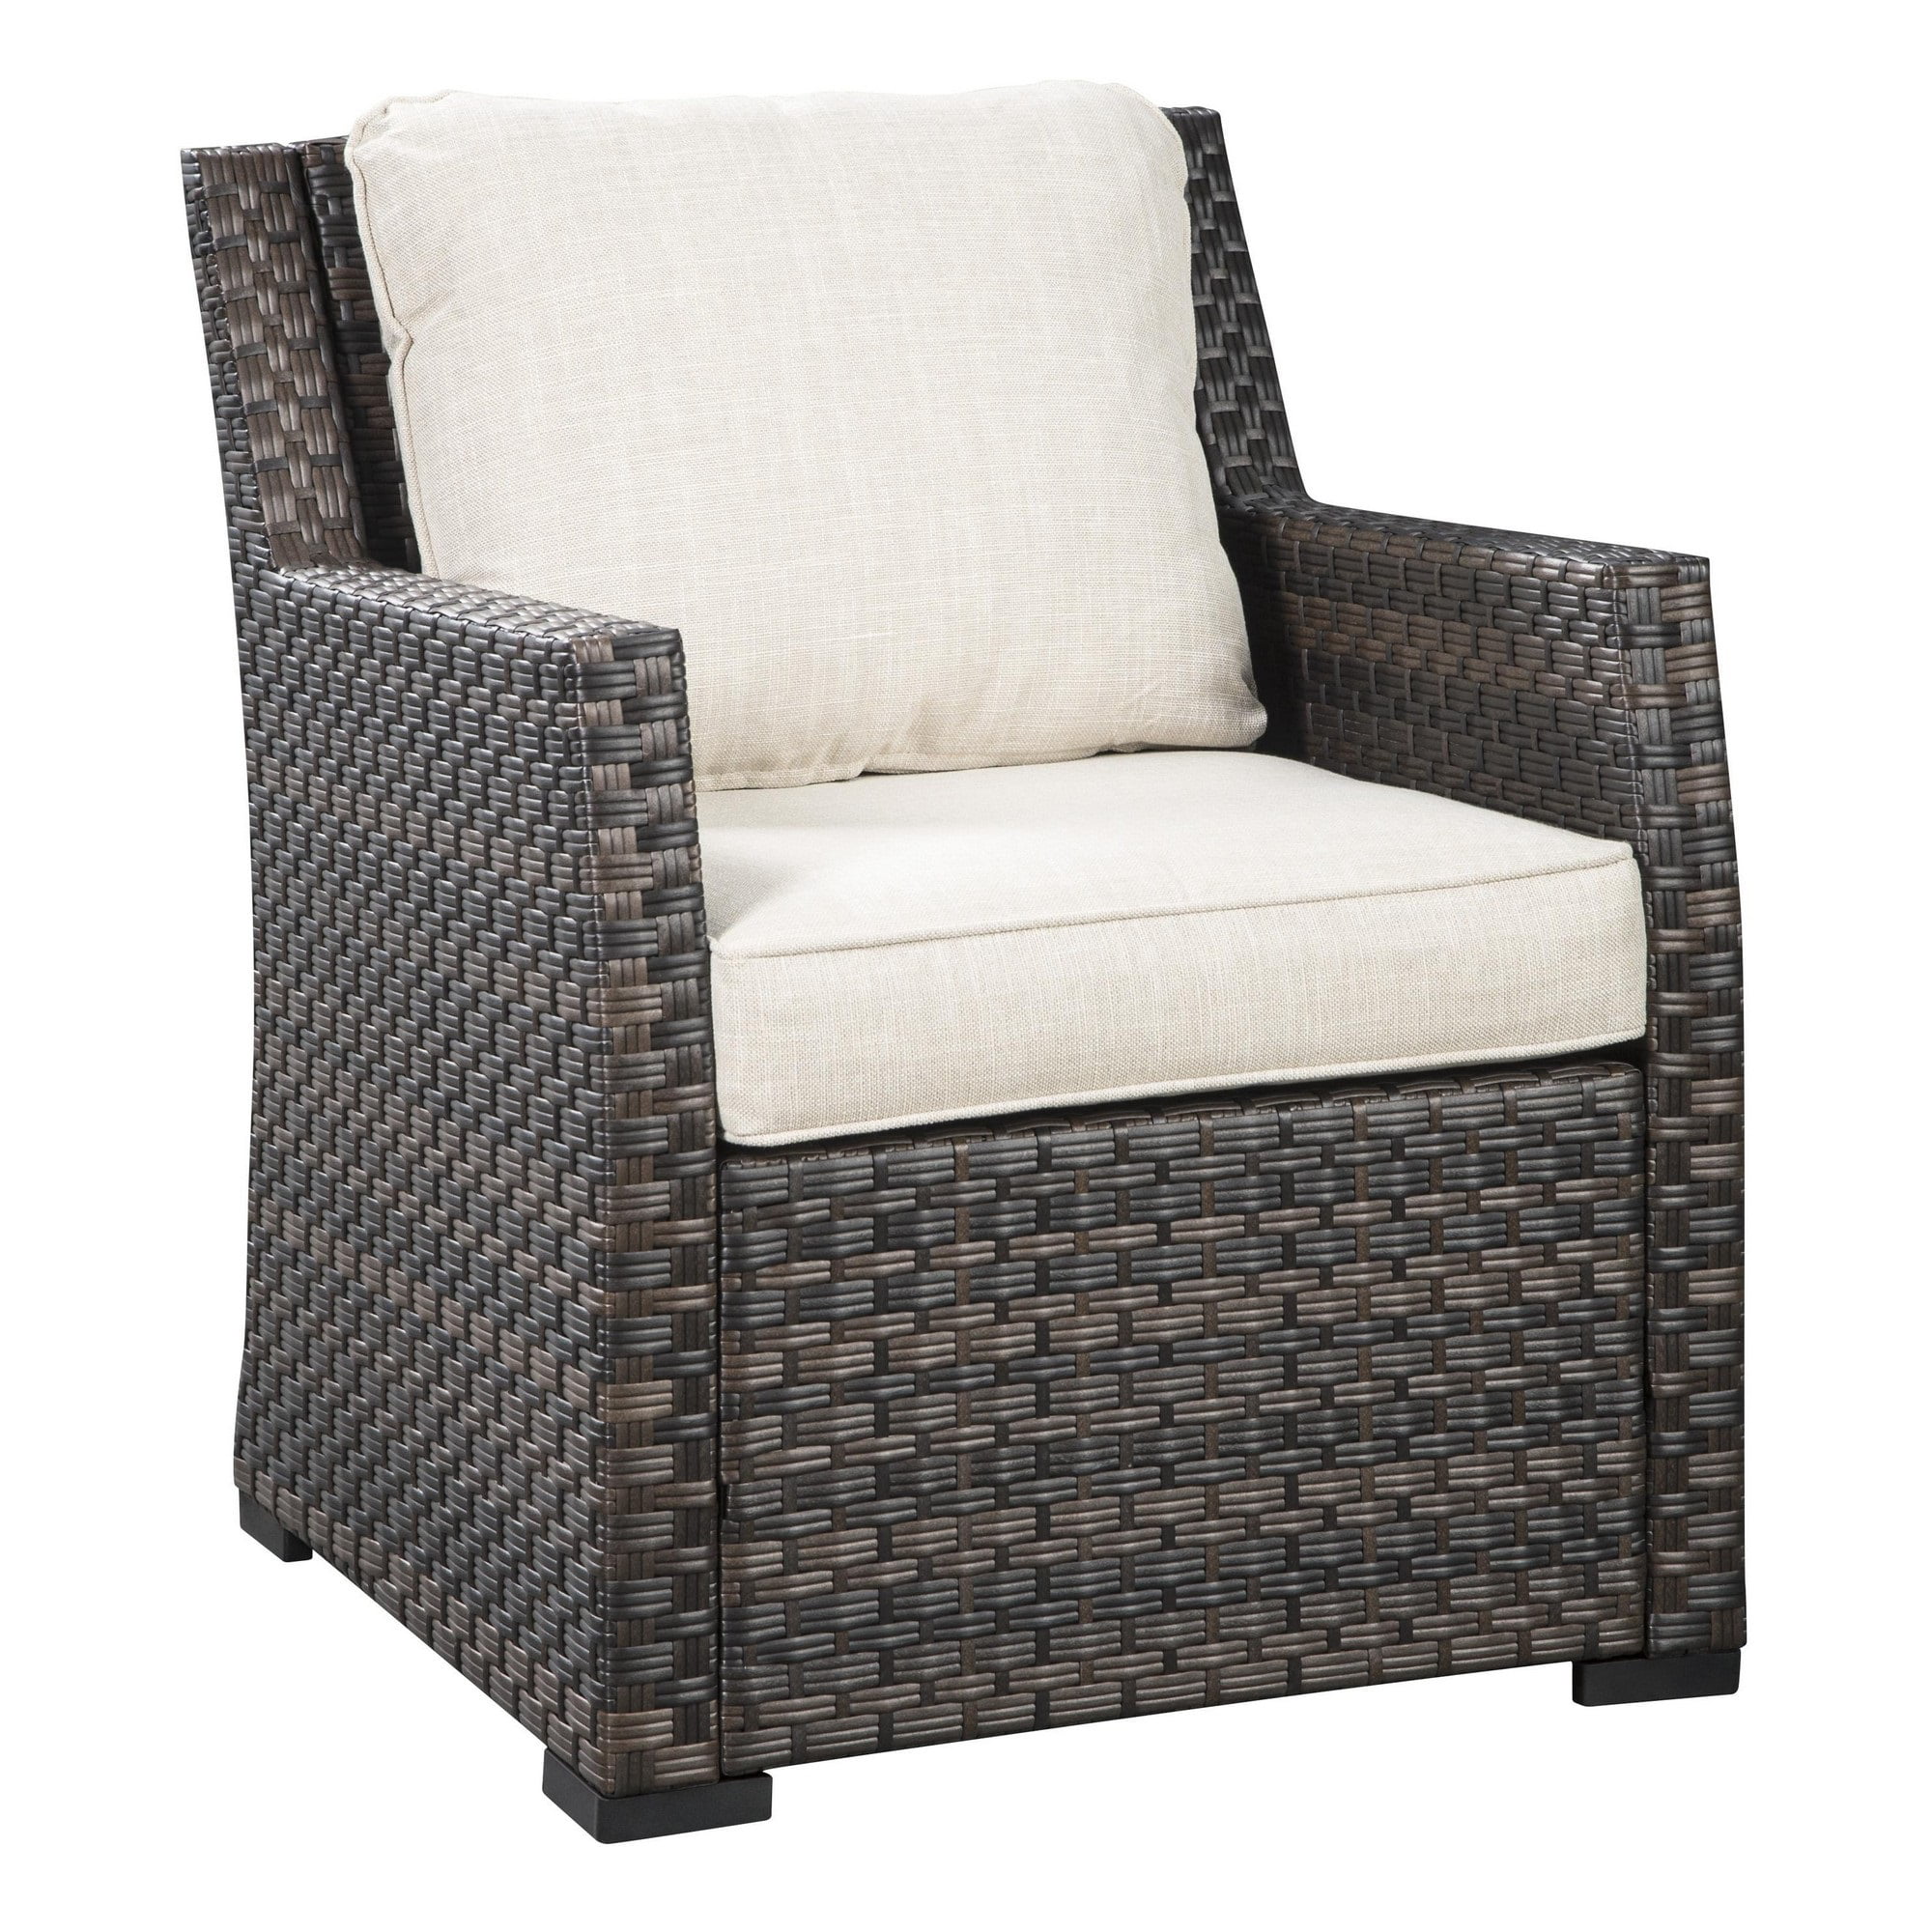 Picture of Benjara BM213360 Resin Wicker Woven Lounge Chair with Track Arms - Brown & Beige - 33.3 x 27.16 x 31.1 in.